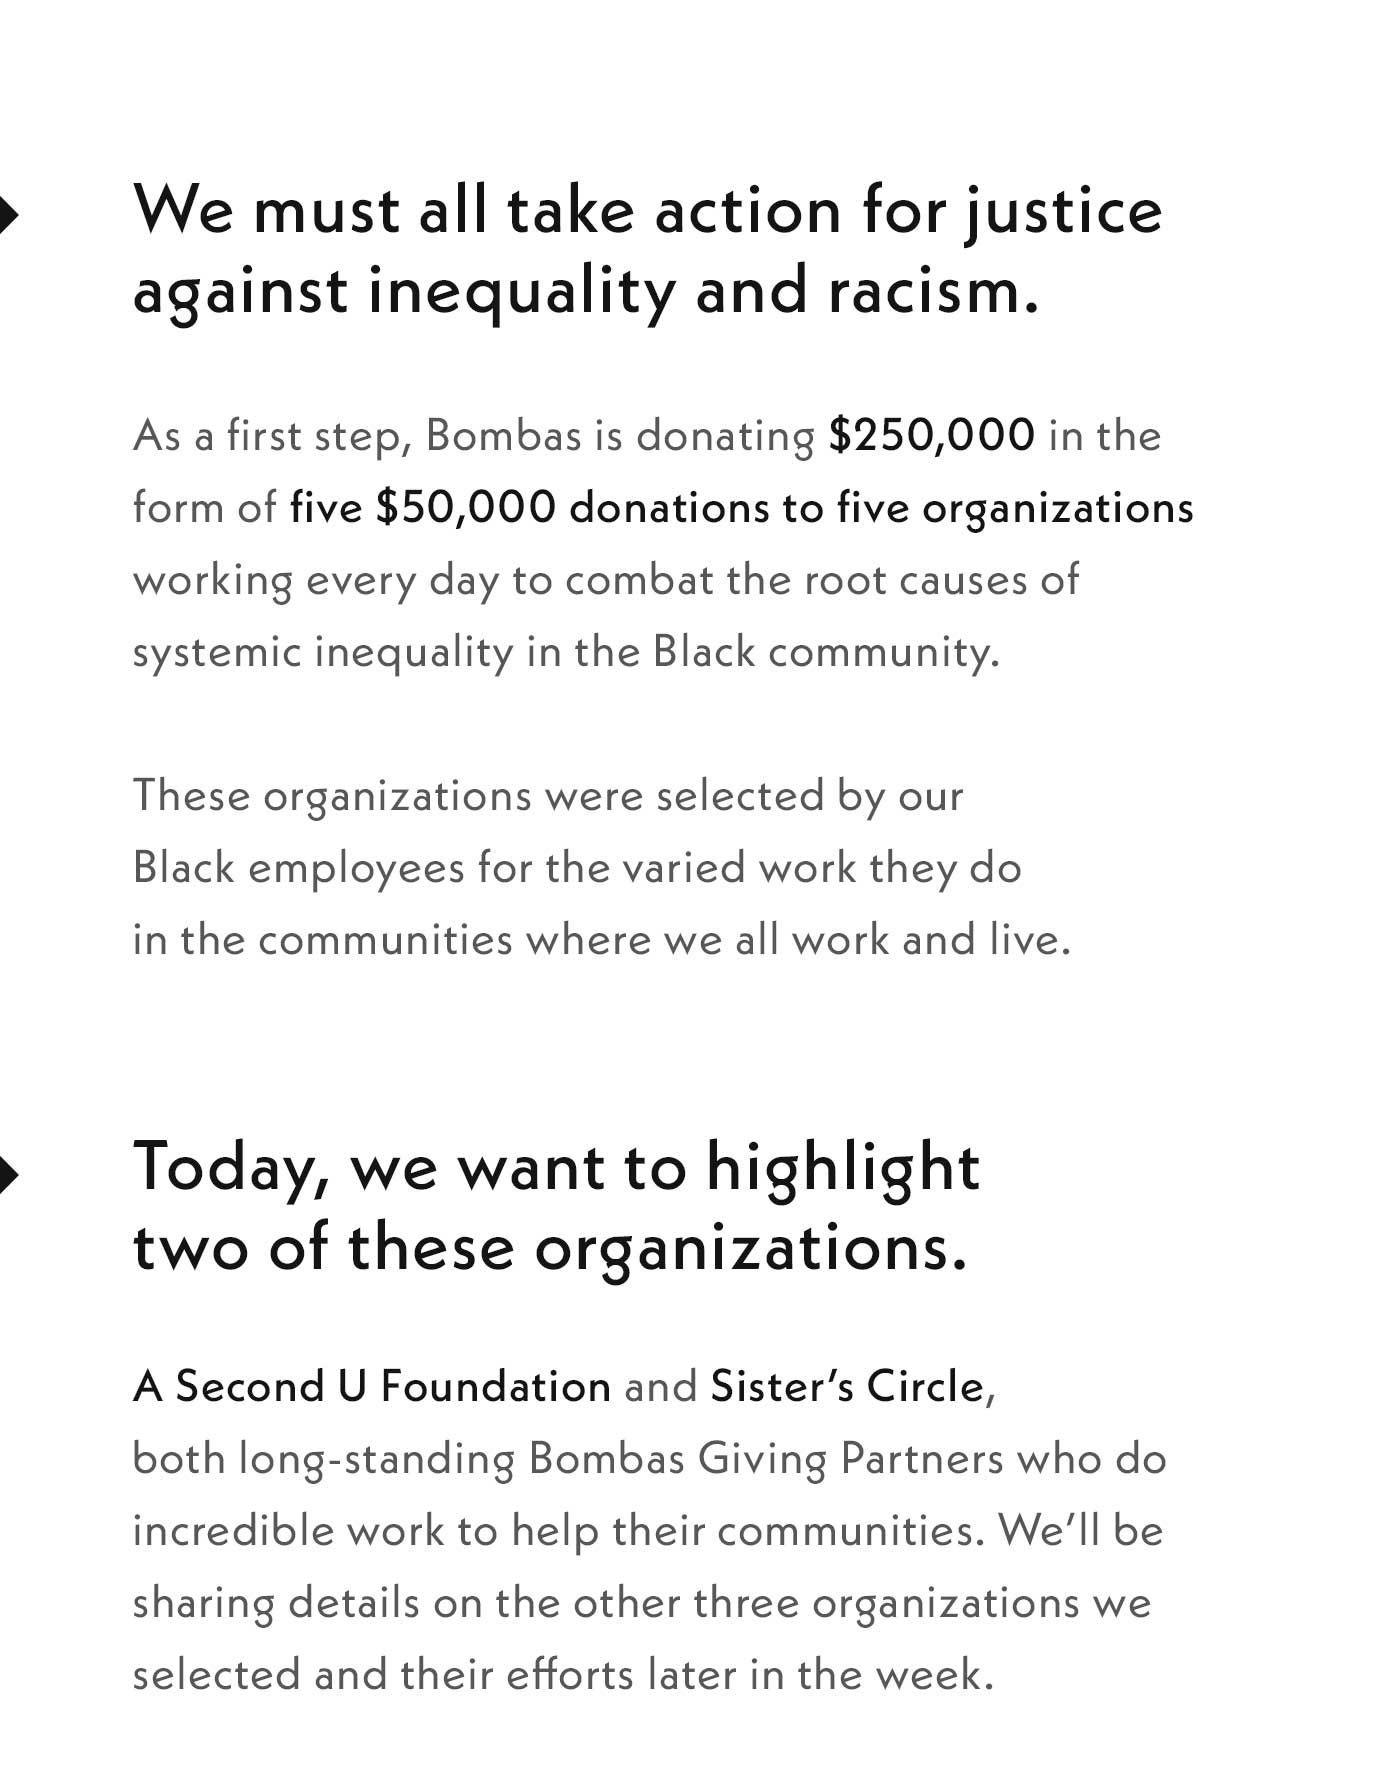 We must all take action for justice against inequality and racism. As a first step, Bombas is donating $250,000 in the form of five $50,000 donations to five organizations working every day to combat the root causes of systemic inequality in the Black community. These organizations were selected by our Black employees for the varied work they do in the communities where we all work and live. Today, we want to highlight two of these organizations. A Second U Foundation and Sisters Circle, both long-standing Bombas Giving Partners who do incredible work to help their communities. We'll be sharing details on the other three organizations we selected and their efforts later in the week.